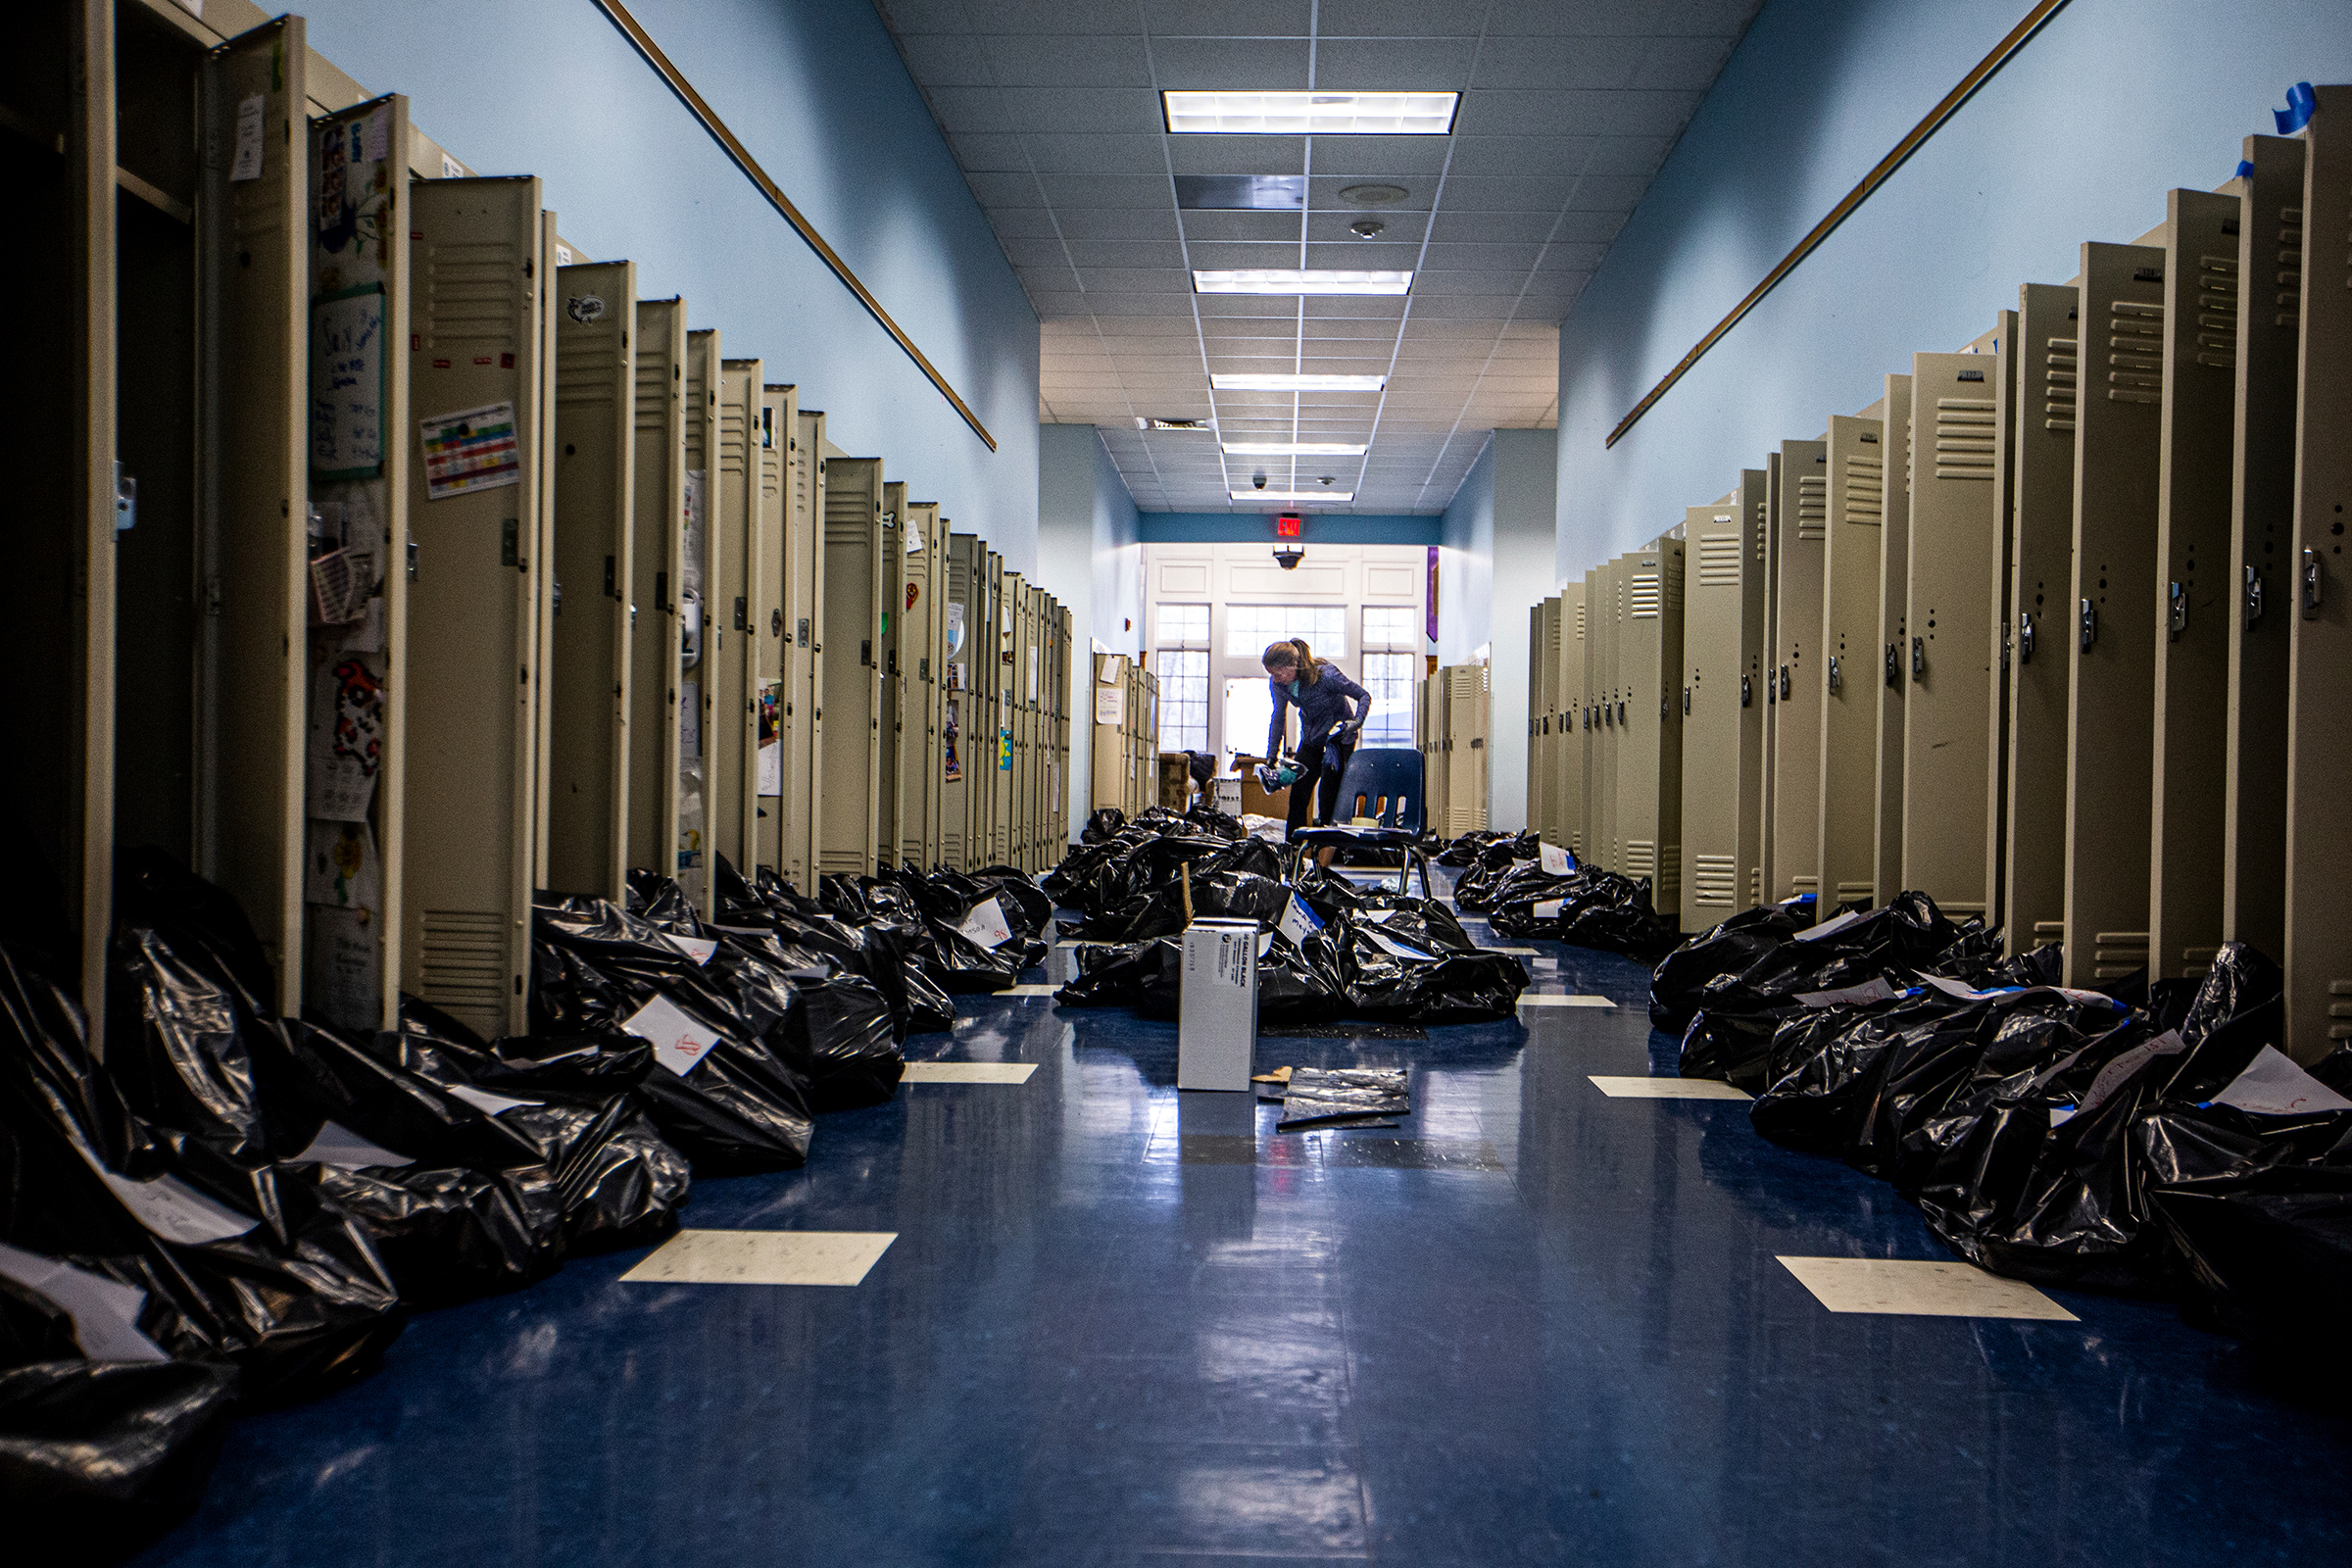 Kelen Walker packs students' locker contents into black trash bags as they clean and sanitize the school while students take online classes from home at Canterbury School in Greensboro, N.C., on March 17. (Khadejeh Nikouyeh—News &amp; Record/AP)